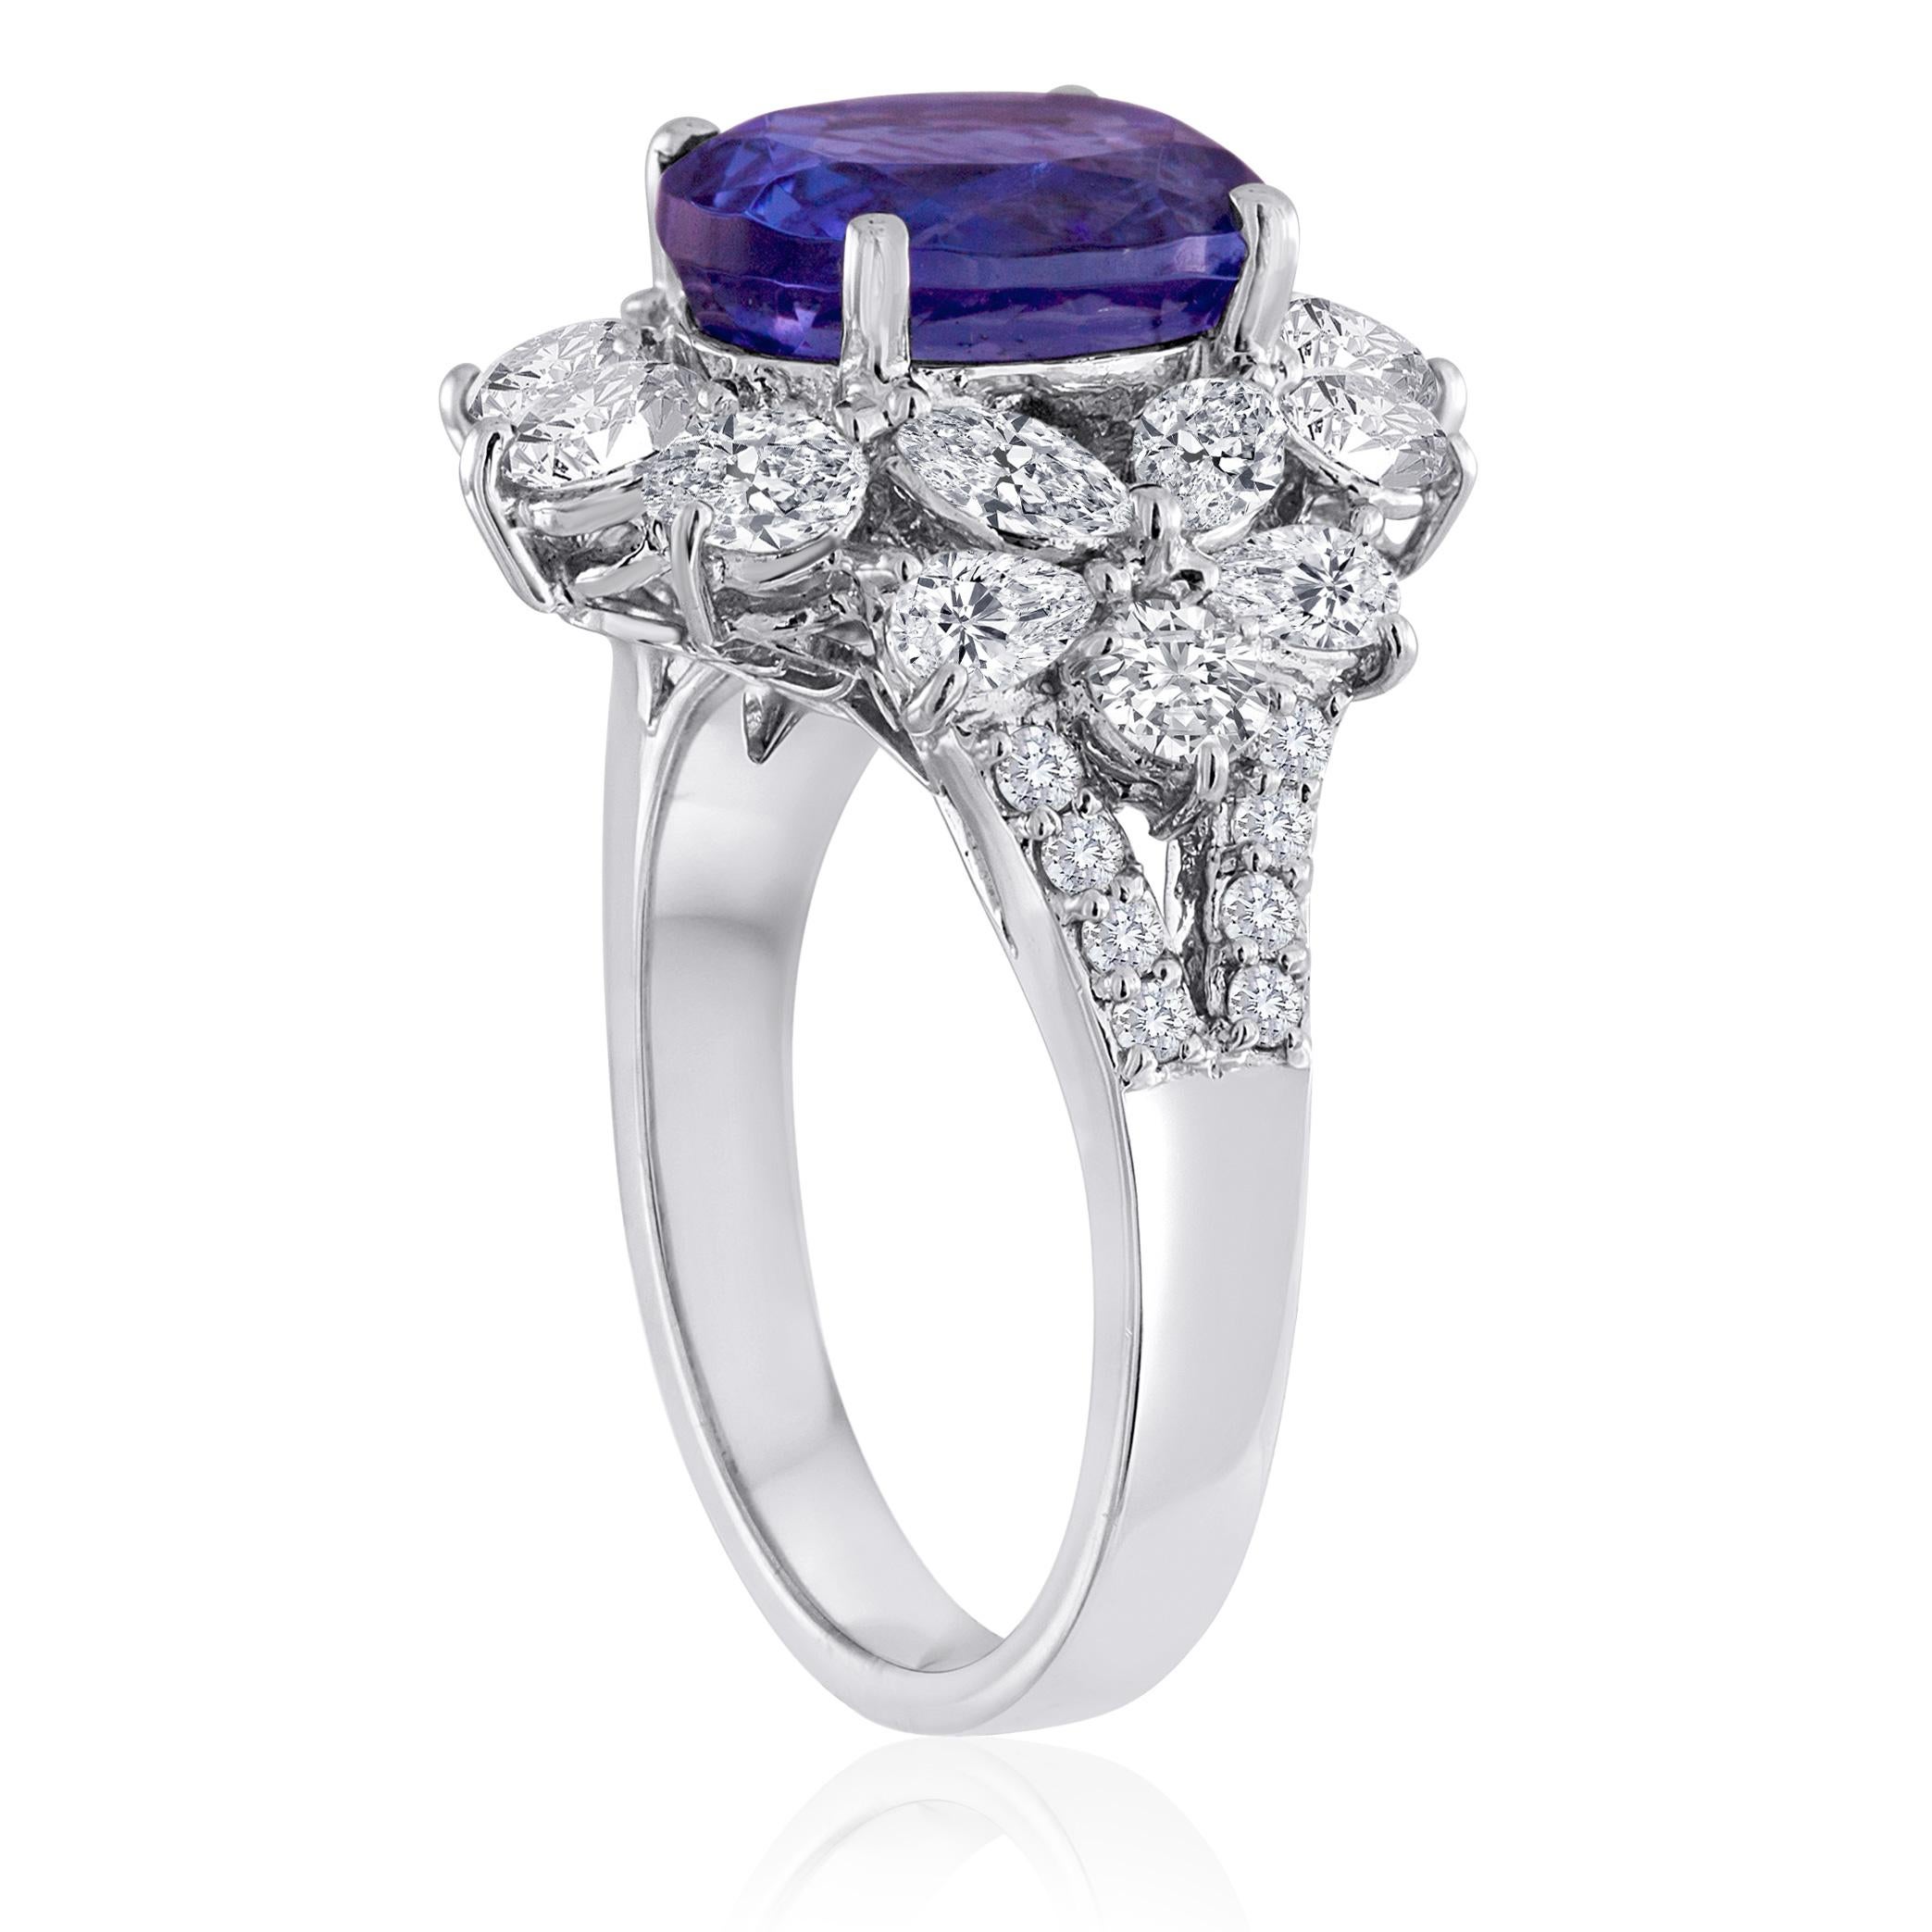 Classic Cocktail Ring
The ring is 18K White Gold
There are 2.25 Carats in Diamonds F/G VS/SI
The Center Stone is 4.10 Carats Tanzanite
The ring is a size 6.5, sizable
The ring weighs 7.9 grams